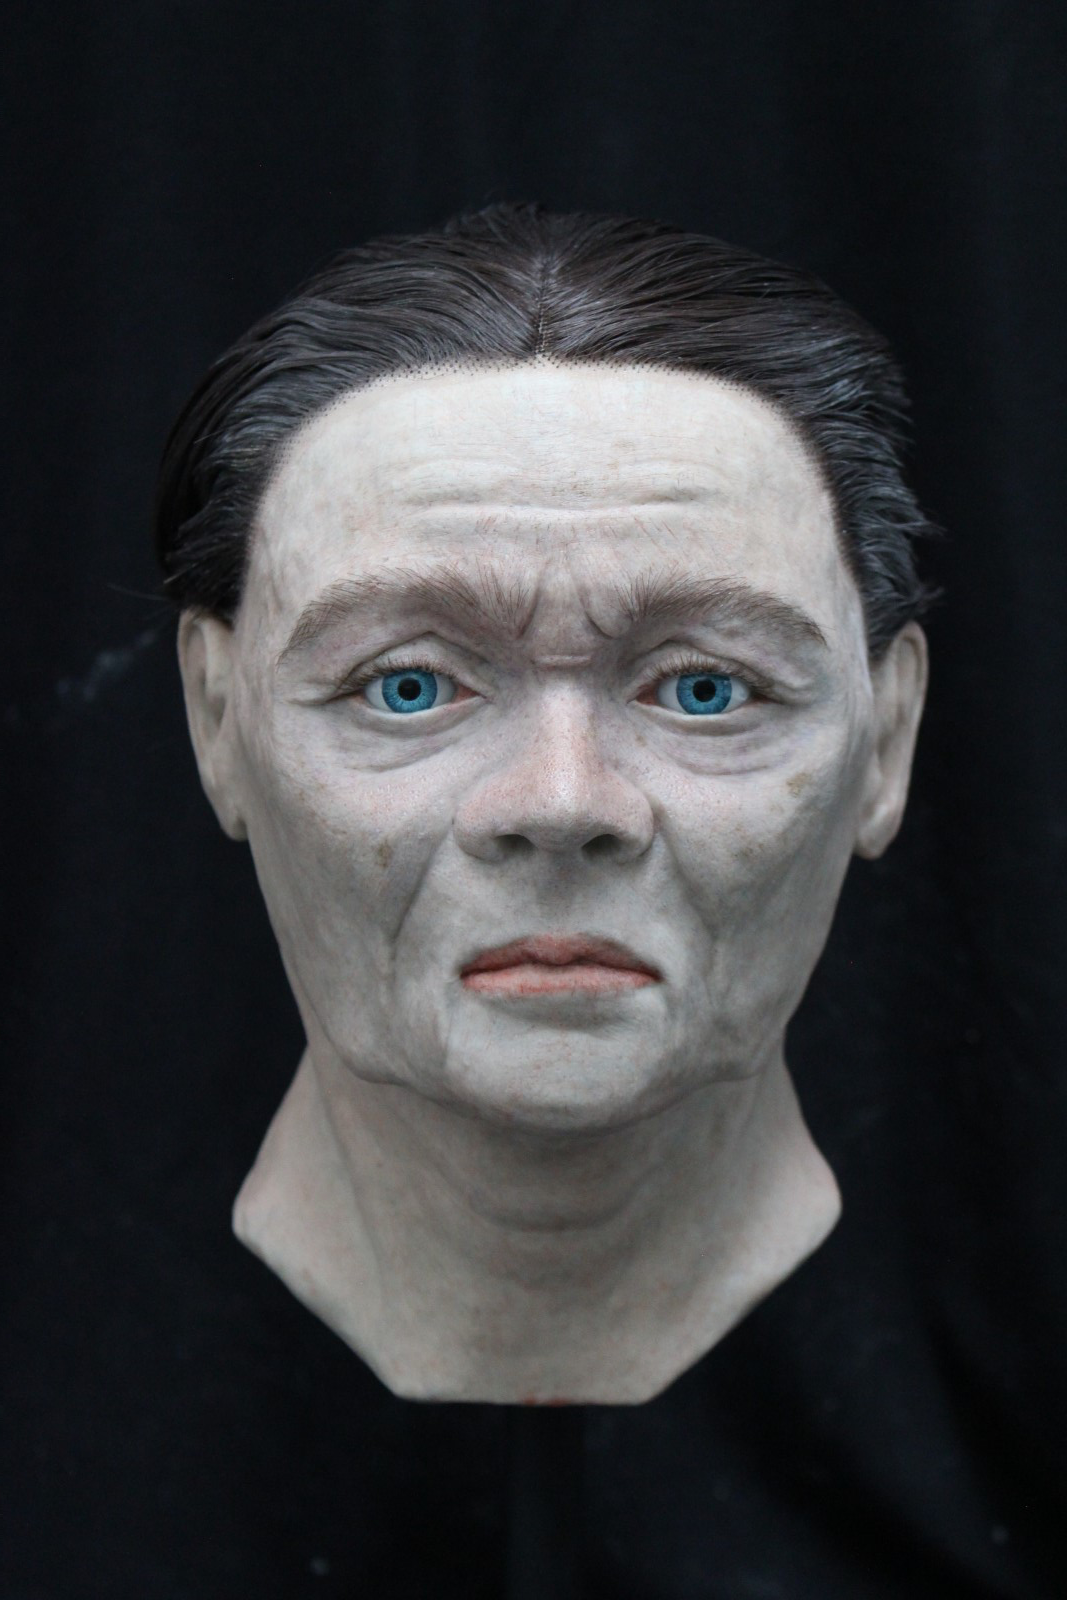 An archaeological facial reconstruction of a man by the name of John Hand, sculpted out of modelling wax and painted with oil paint.